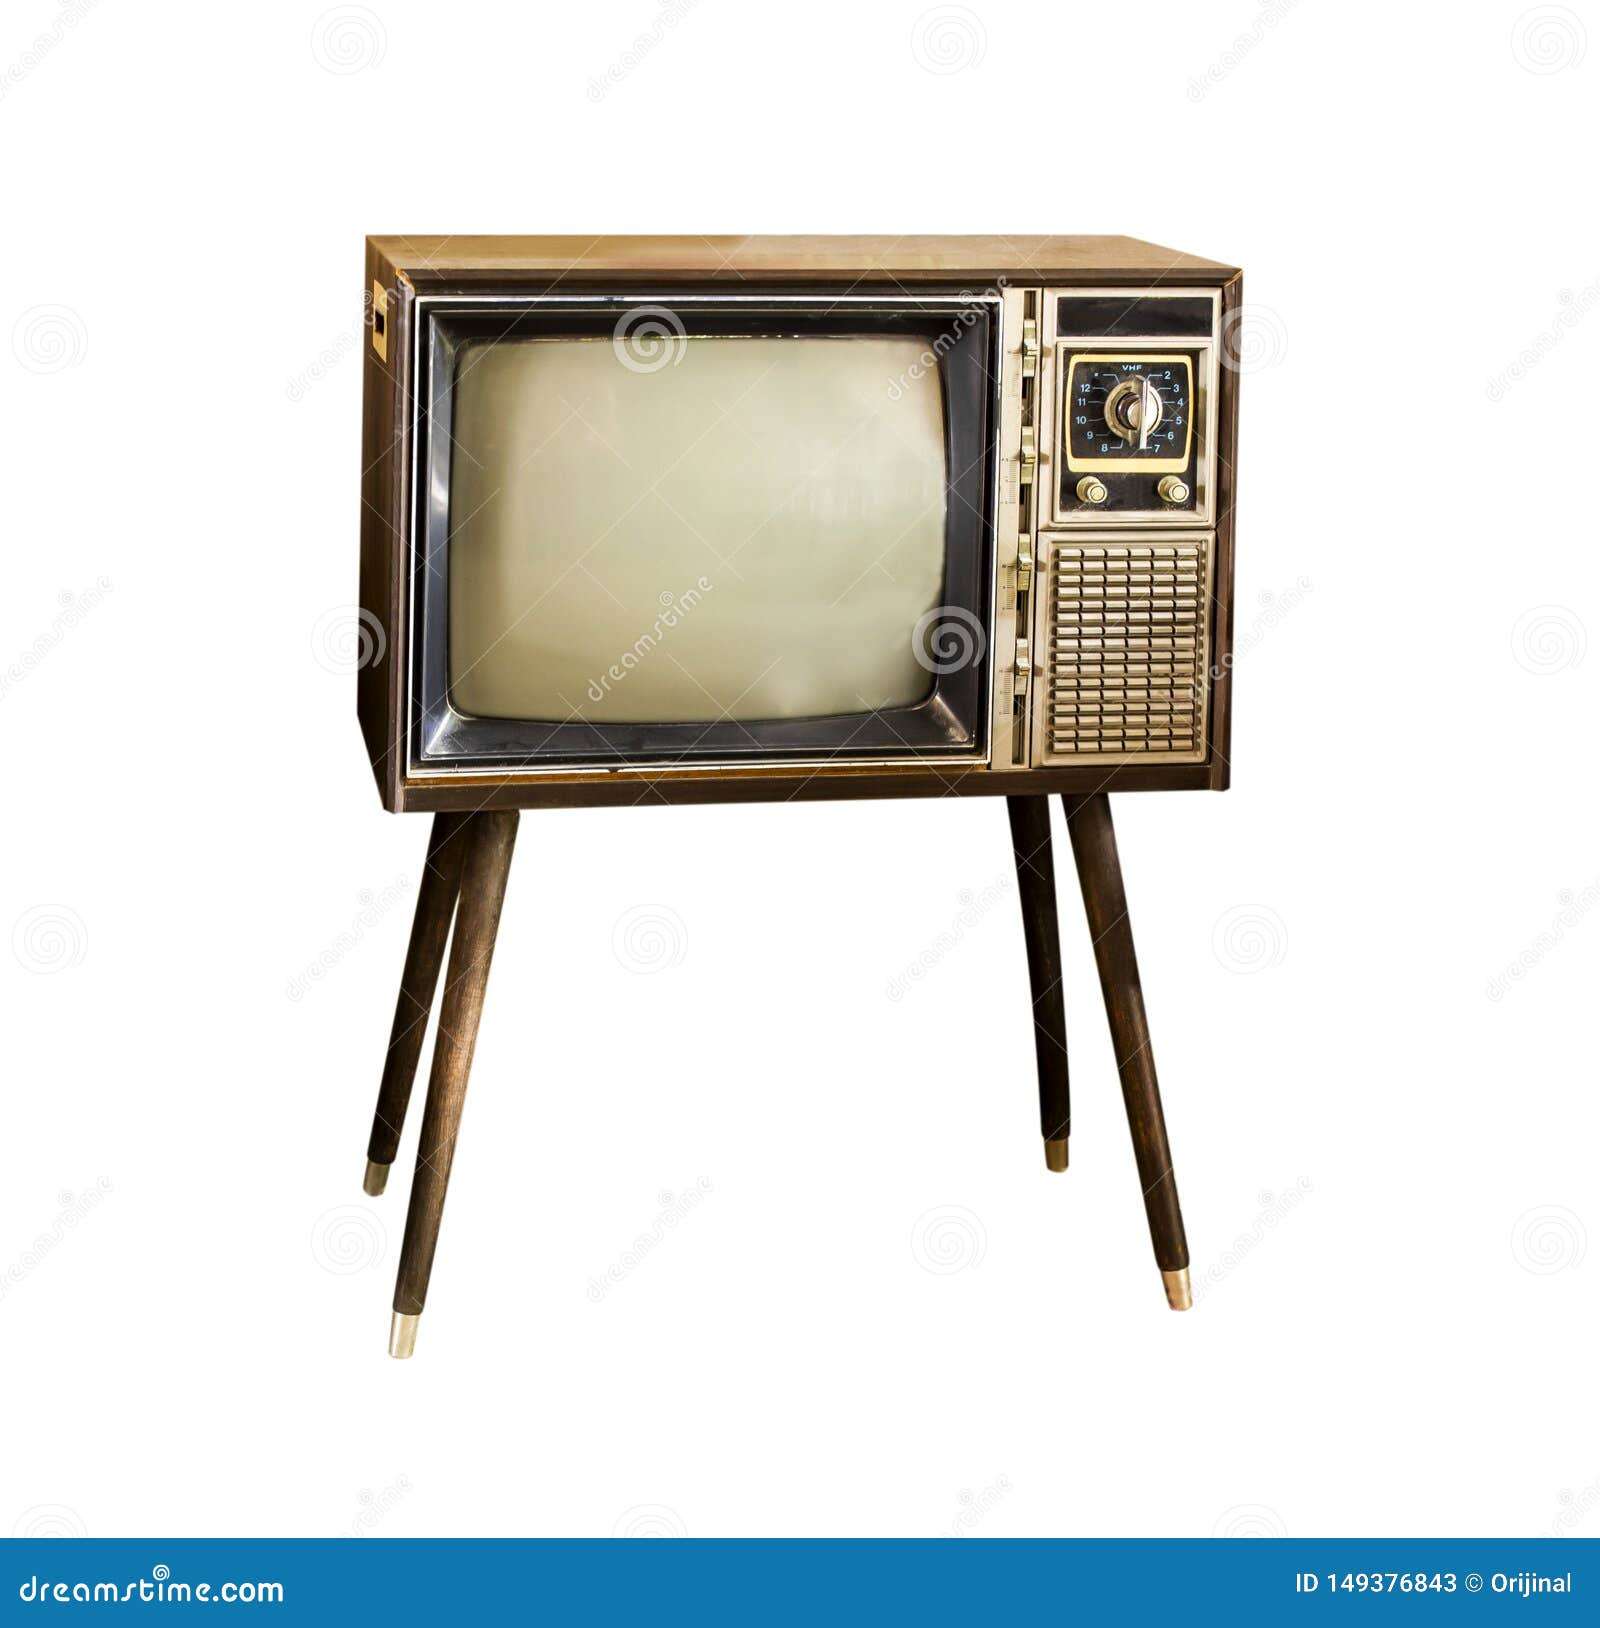 Vintage Television, Antique TV, Retro Technology, Old TV Isolate On ...